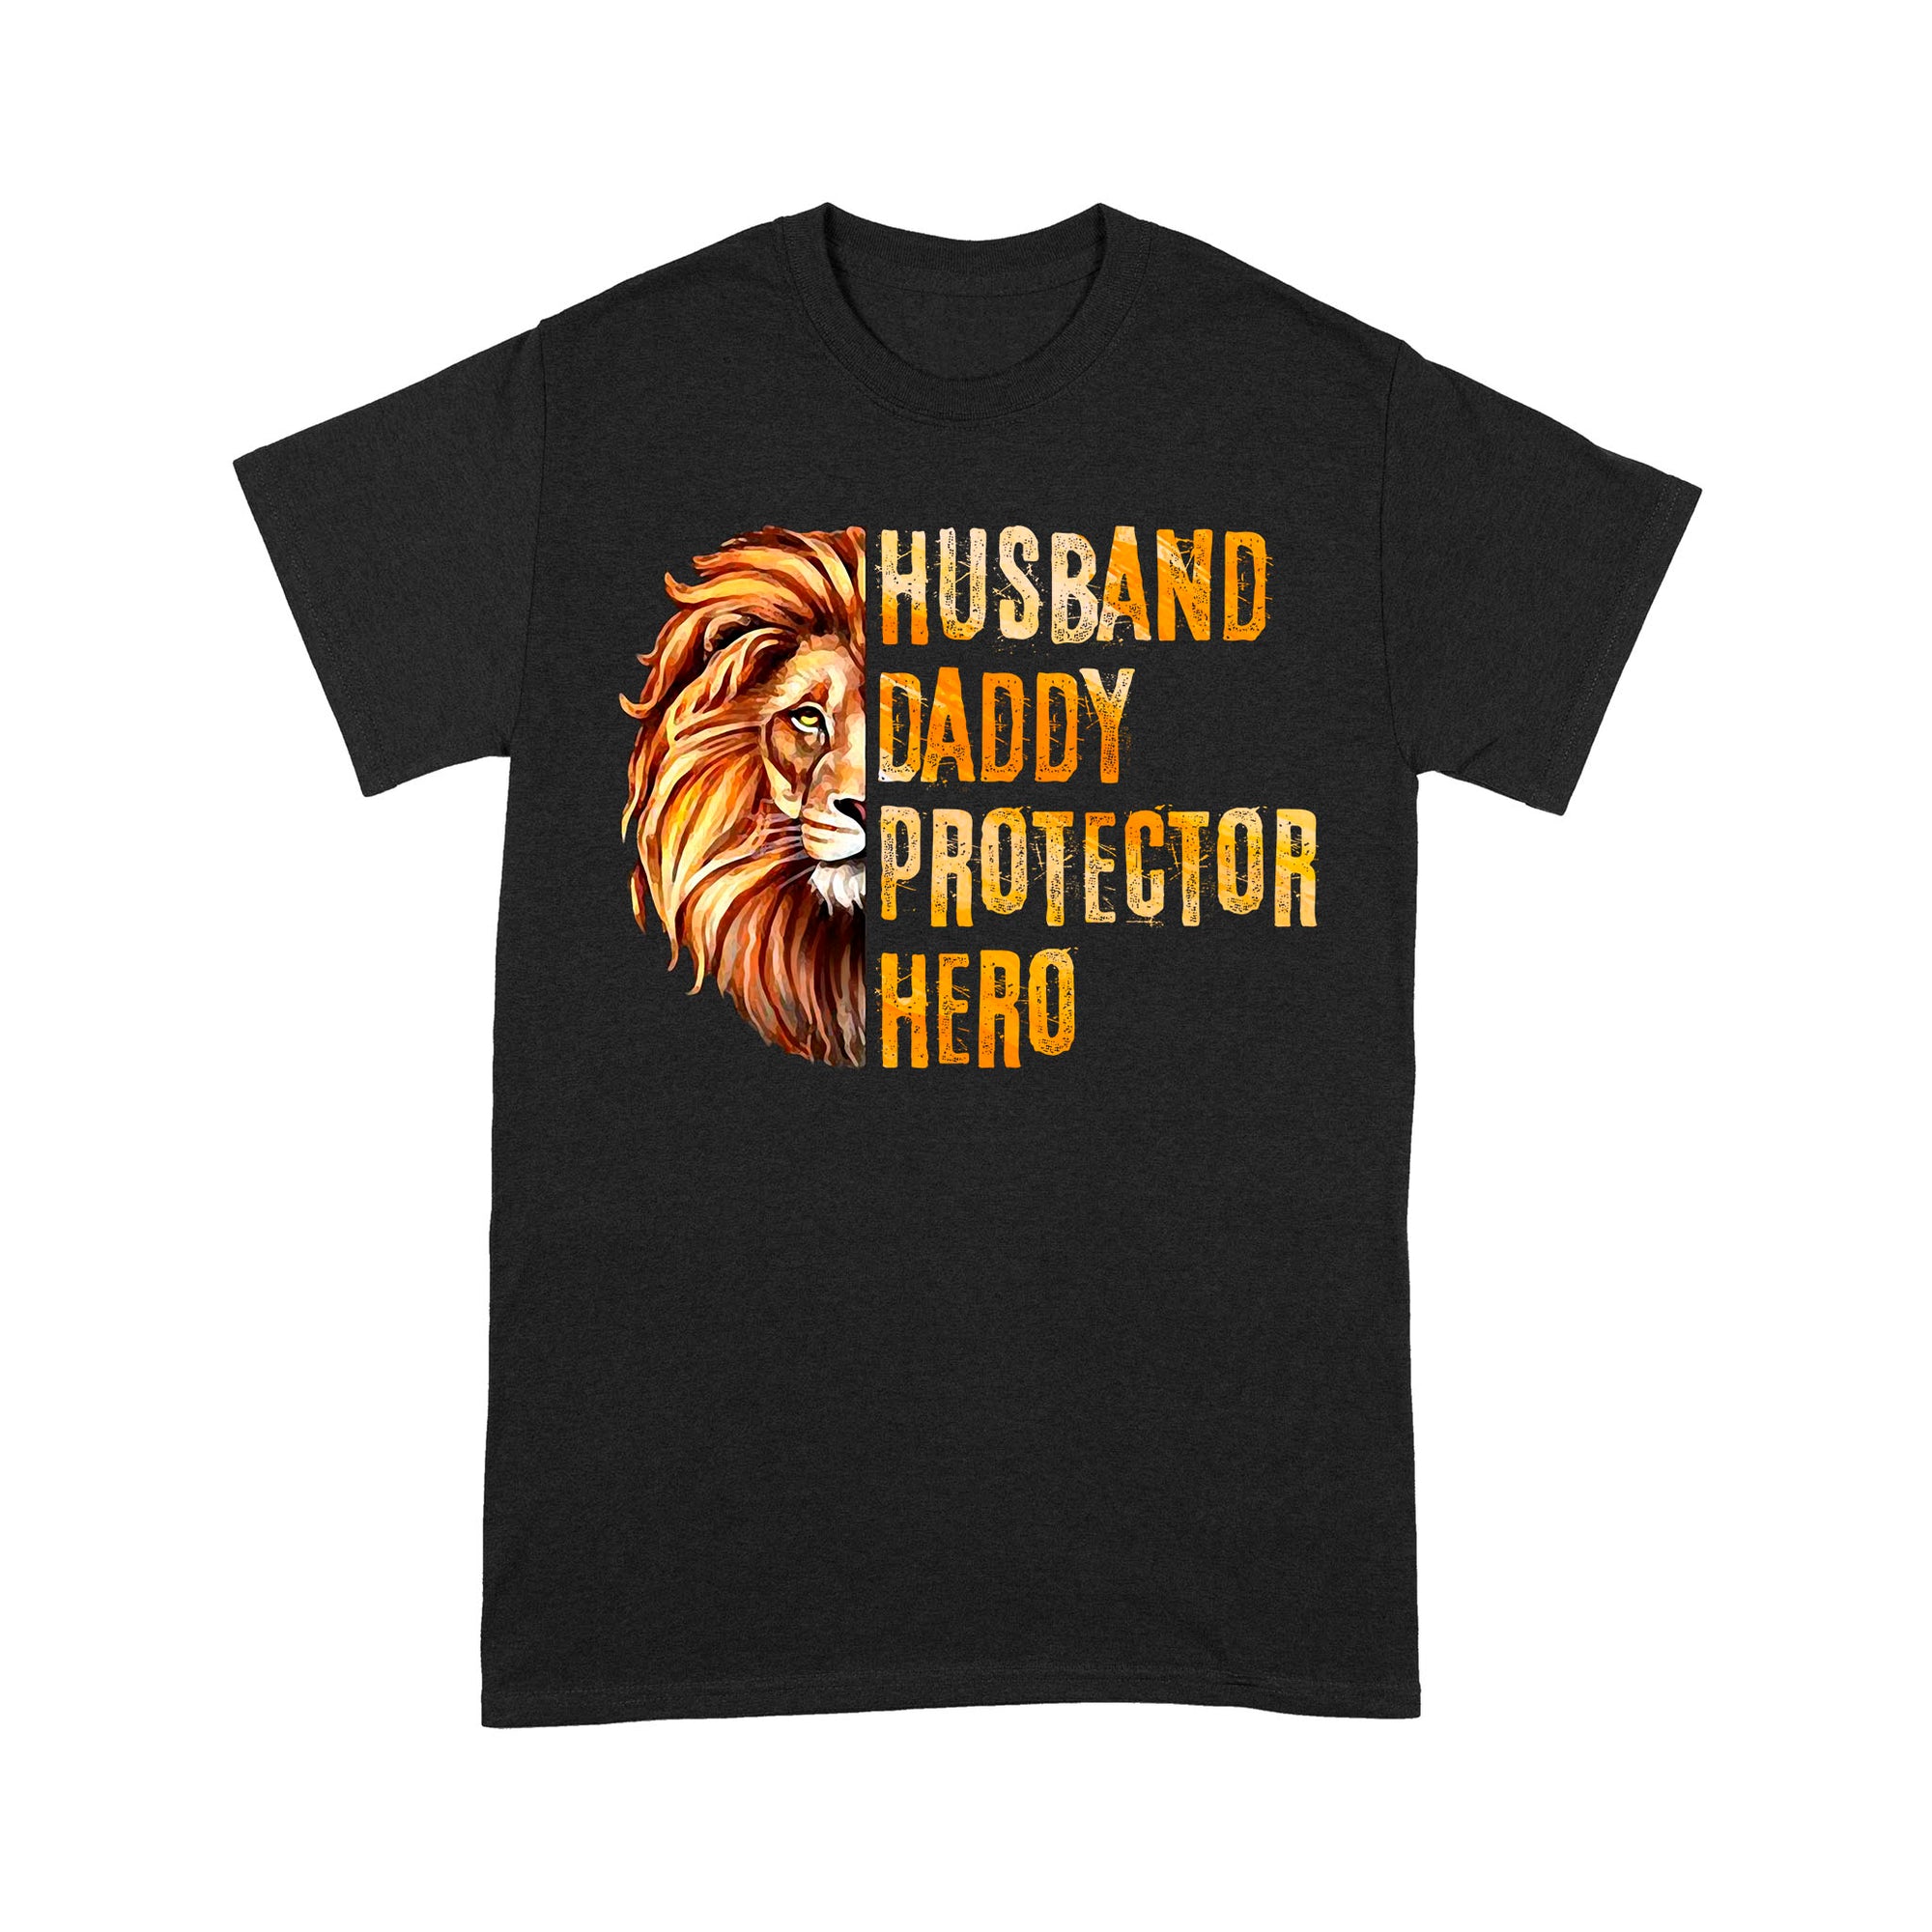 Husband Daddy Protector Hero Gift Ideas for Husband Dad Fathers Day - Standard T-shirt